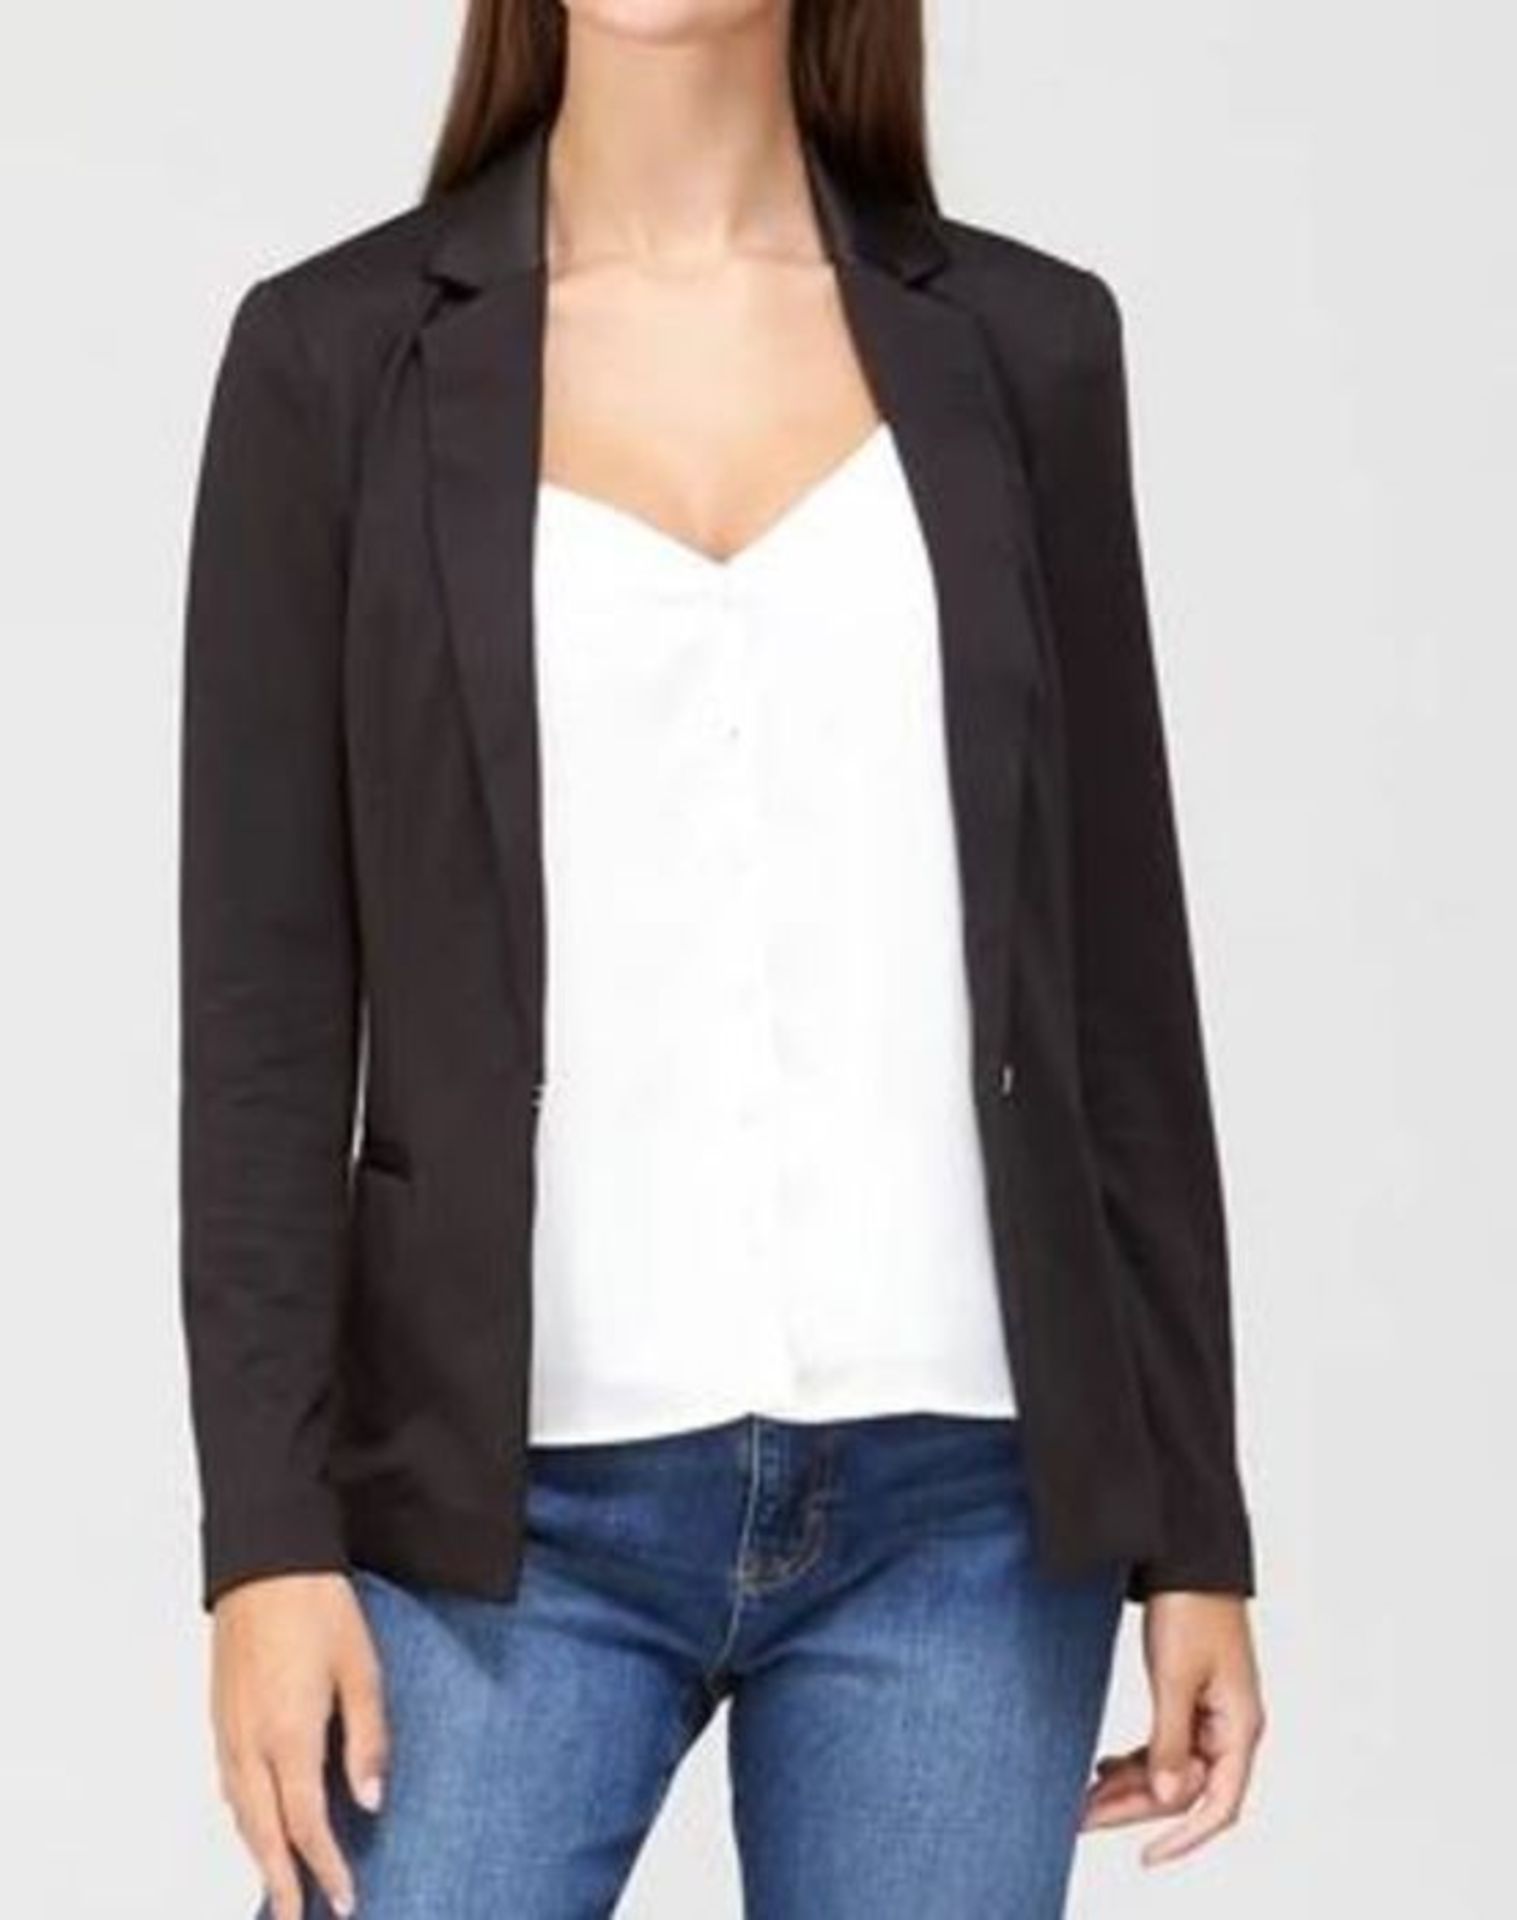 10 X V BY VERY VALUE PONTE JACKET - BLACK / UK SIZE 18 / COMBINED RRP £250.00 / BRAND NEW WITH TAGS